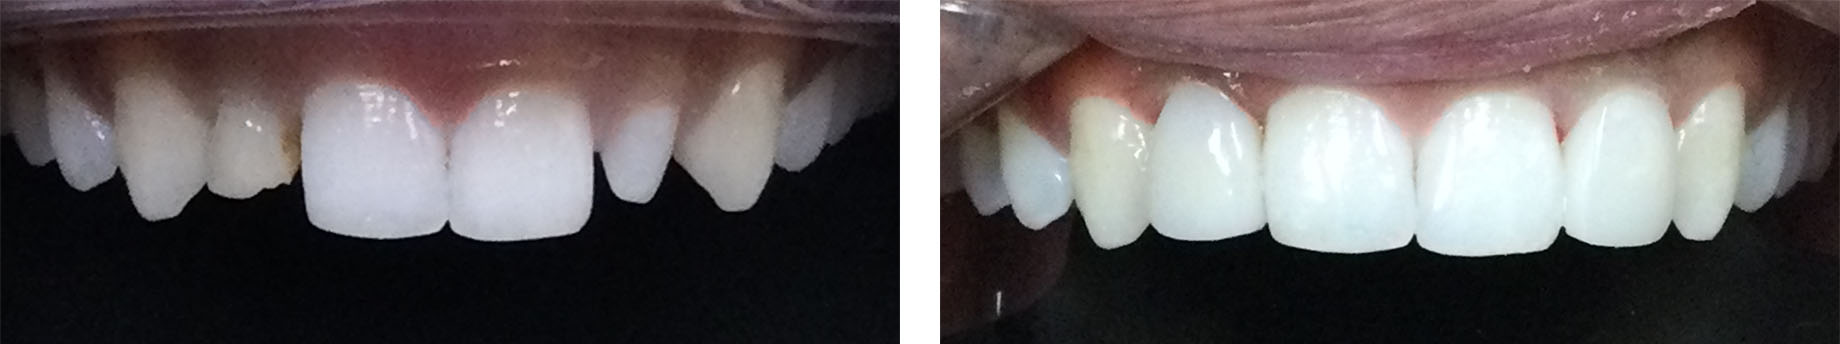 Before and After Photo - Change the tooth size and shape to create a balanced and desired smile